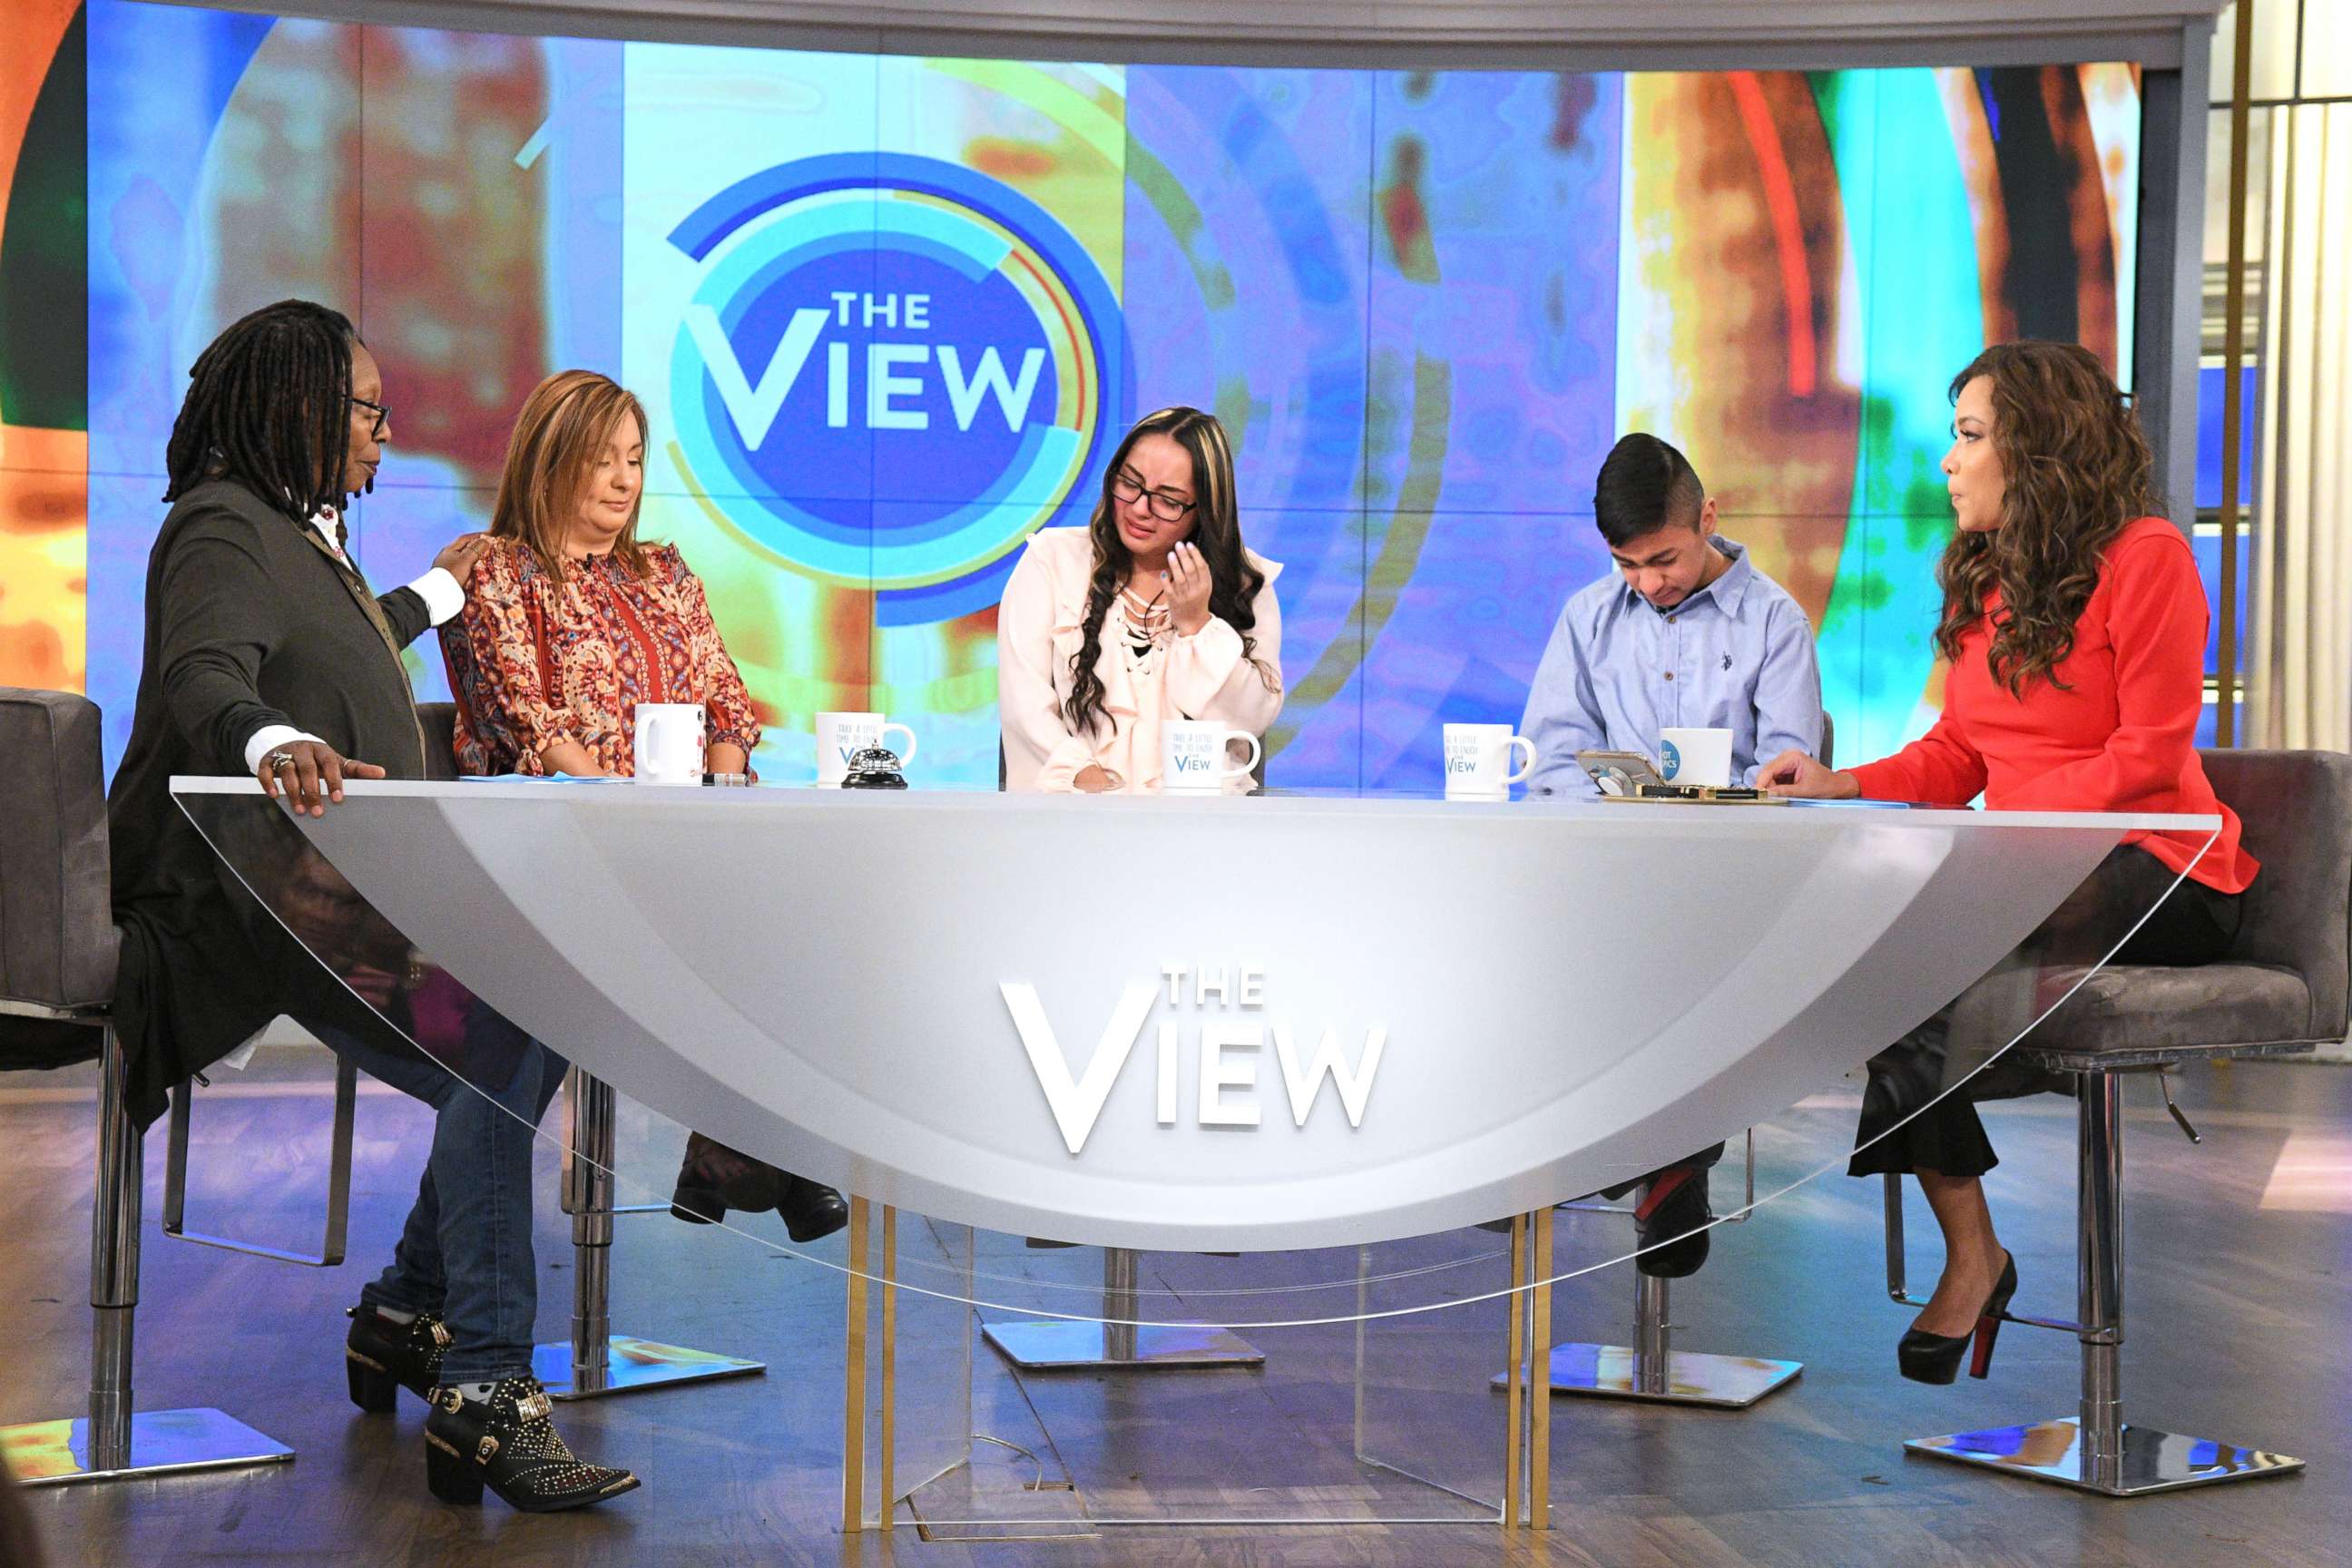 PHOTO: Jorge Garcia, an undocumented husband and father of two, and his family today spoke out on "The View" about his deportation to Mexico this week after living in the United States for 30 years.